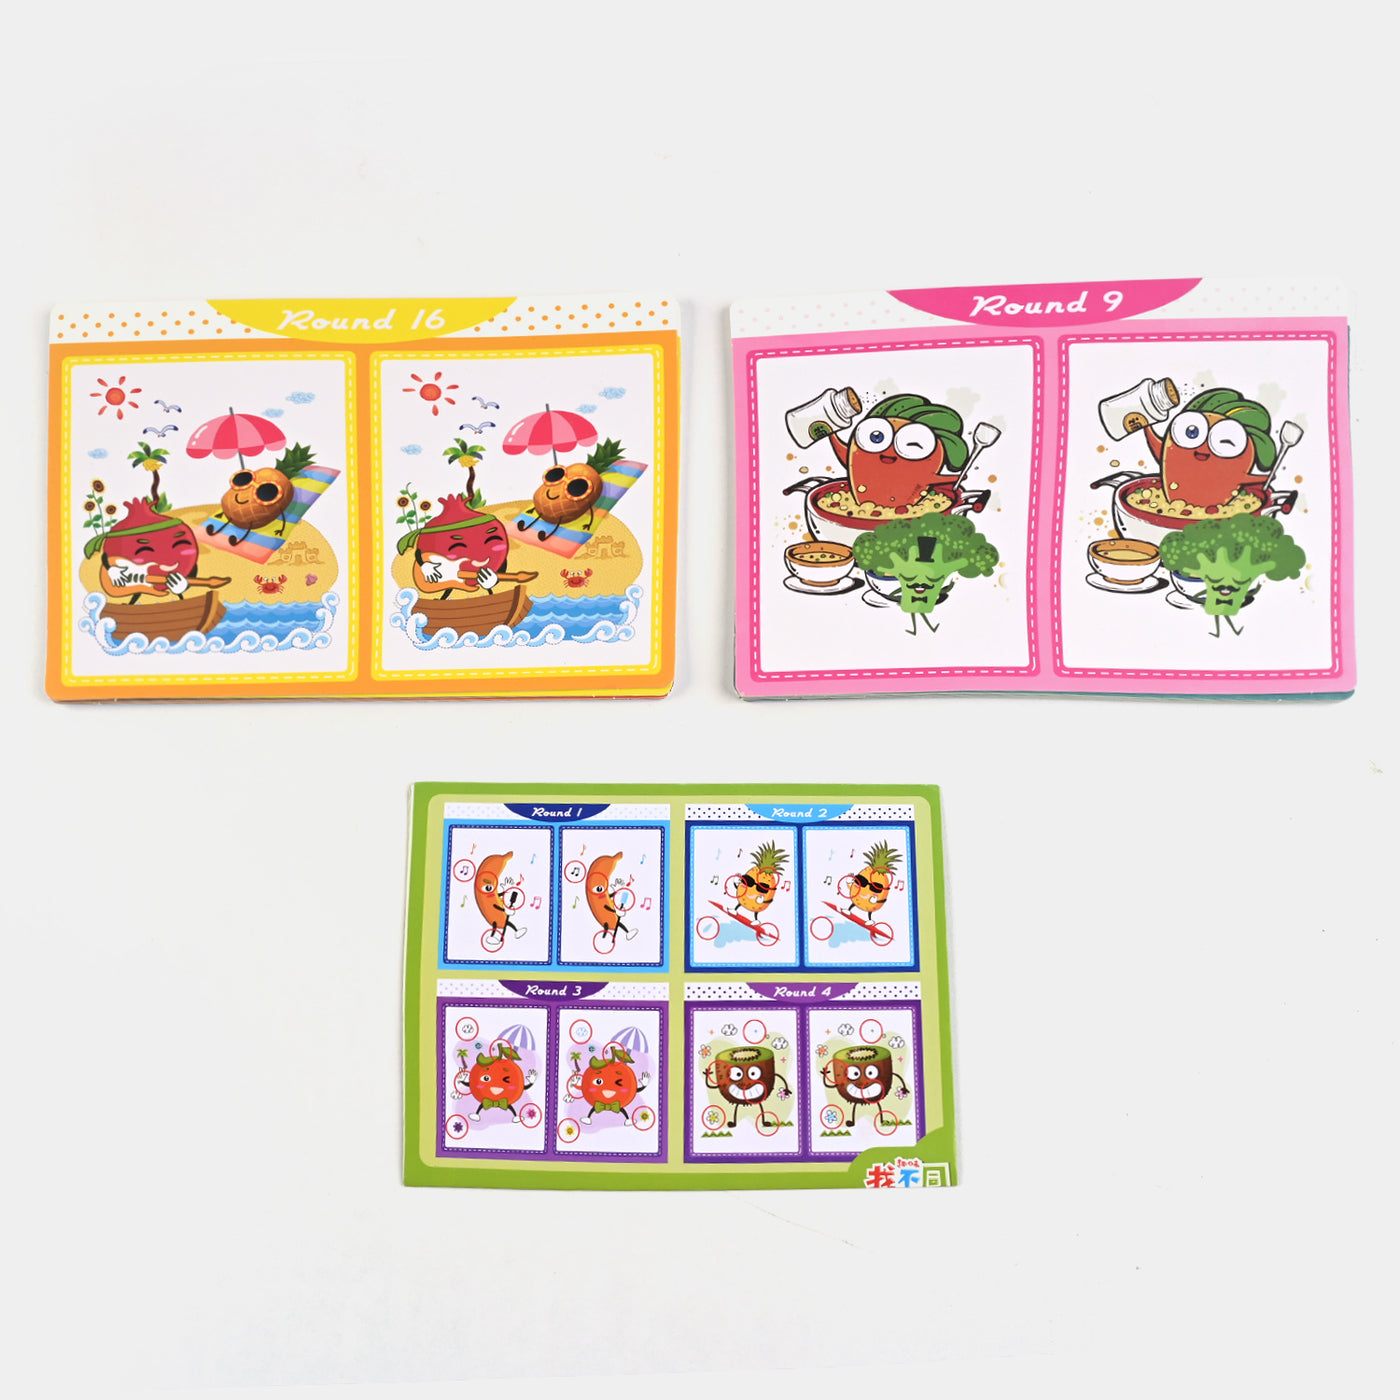 Find Difference Card Game For Kids